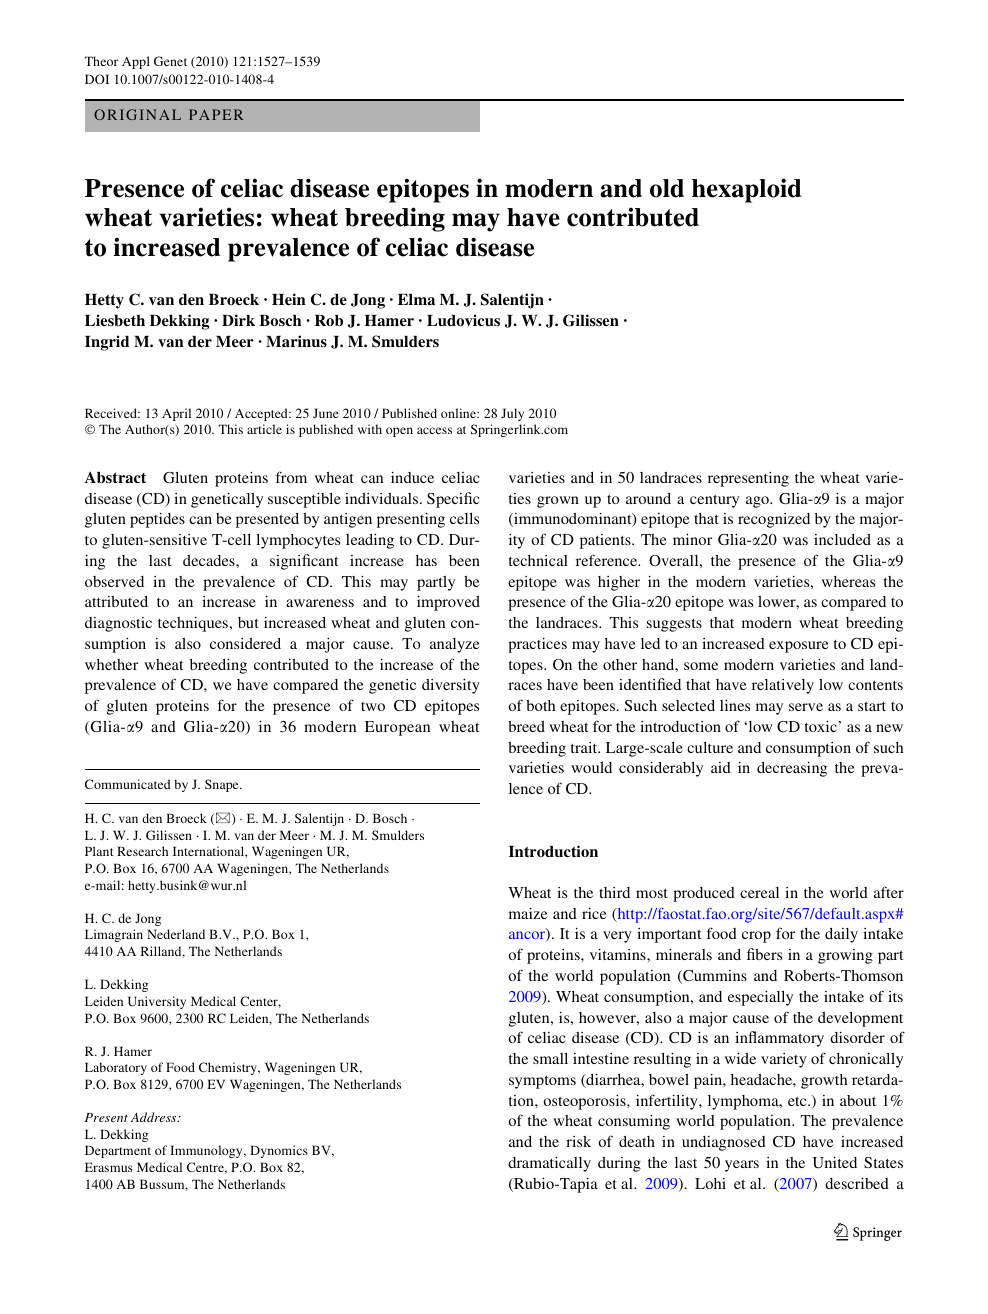 Presence Of Celiac Disease Epitopes In Modern And Old Hexaploid Wheat Varieties Wheat Breeding May Have Contributed To Increased Prevalence Of Celiac Disease Topic Of Research Paper In Biological Sciences Download